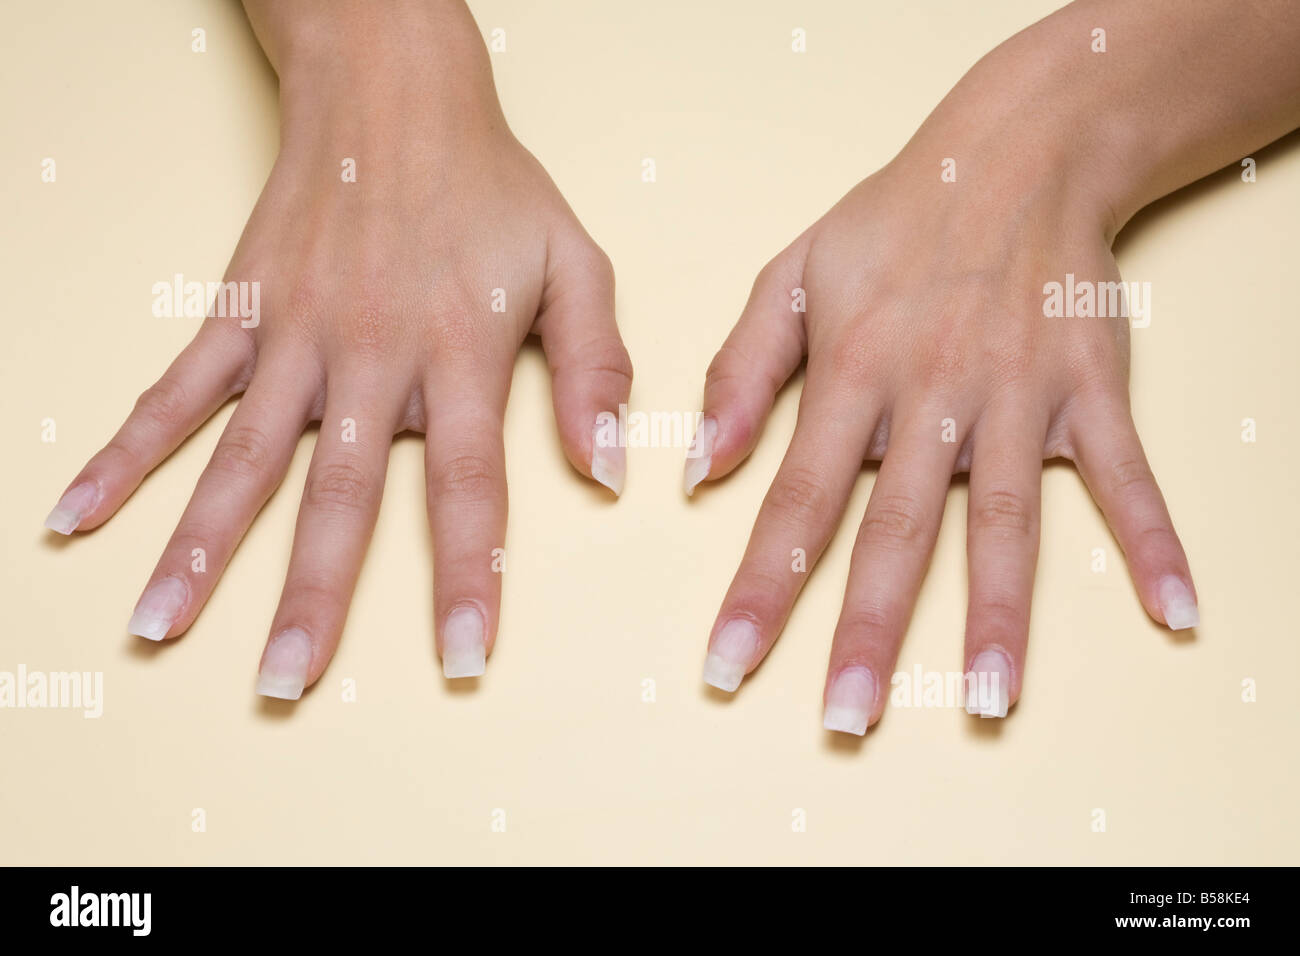 Manicured hands before applying of false nails. Mains manucurées avant pose de faux ongles (ongles americains). Stock Photo